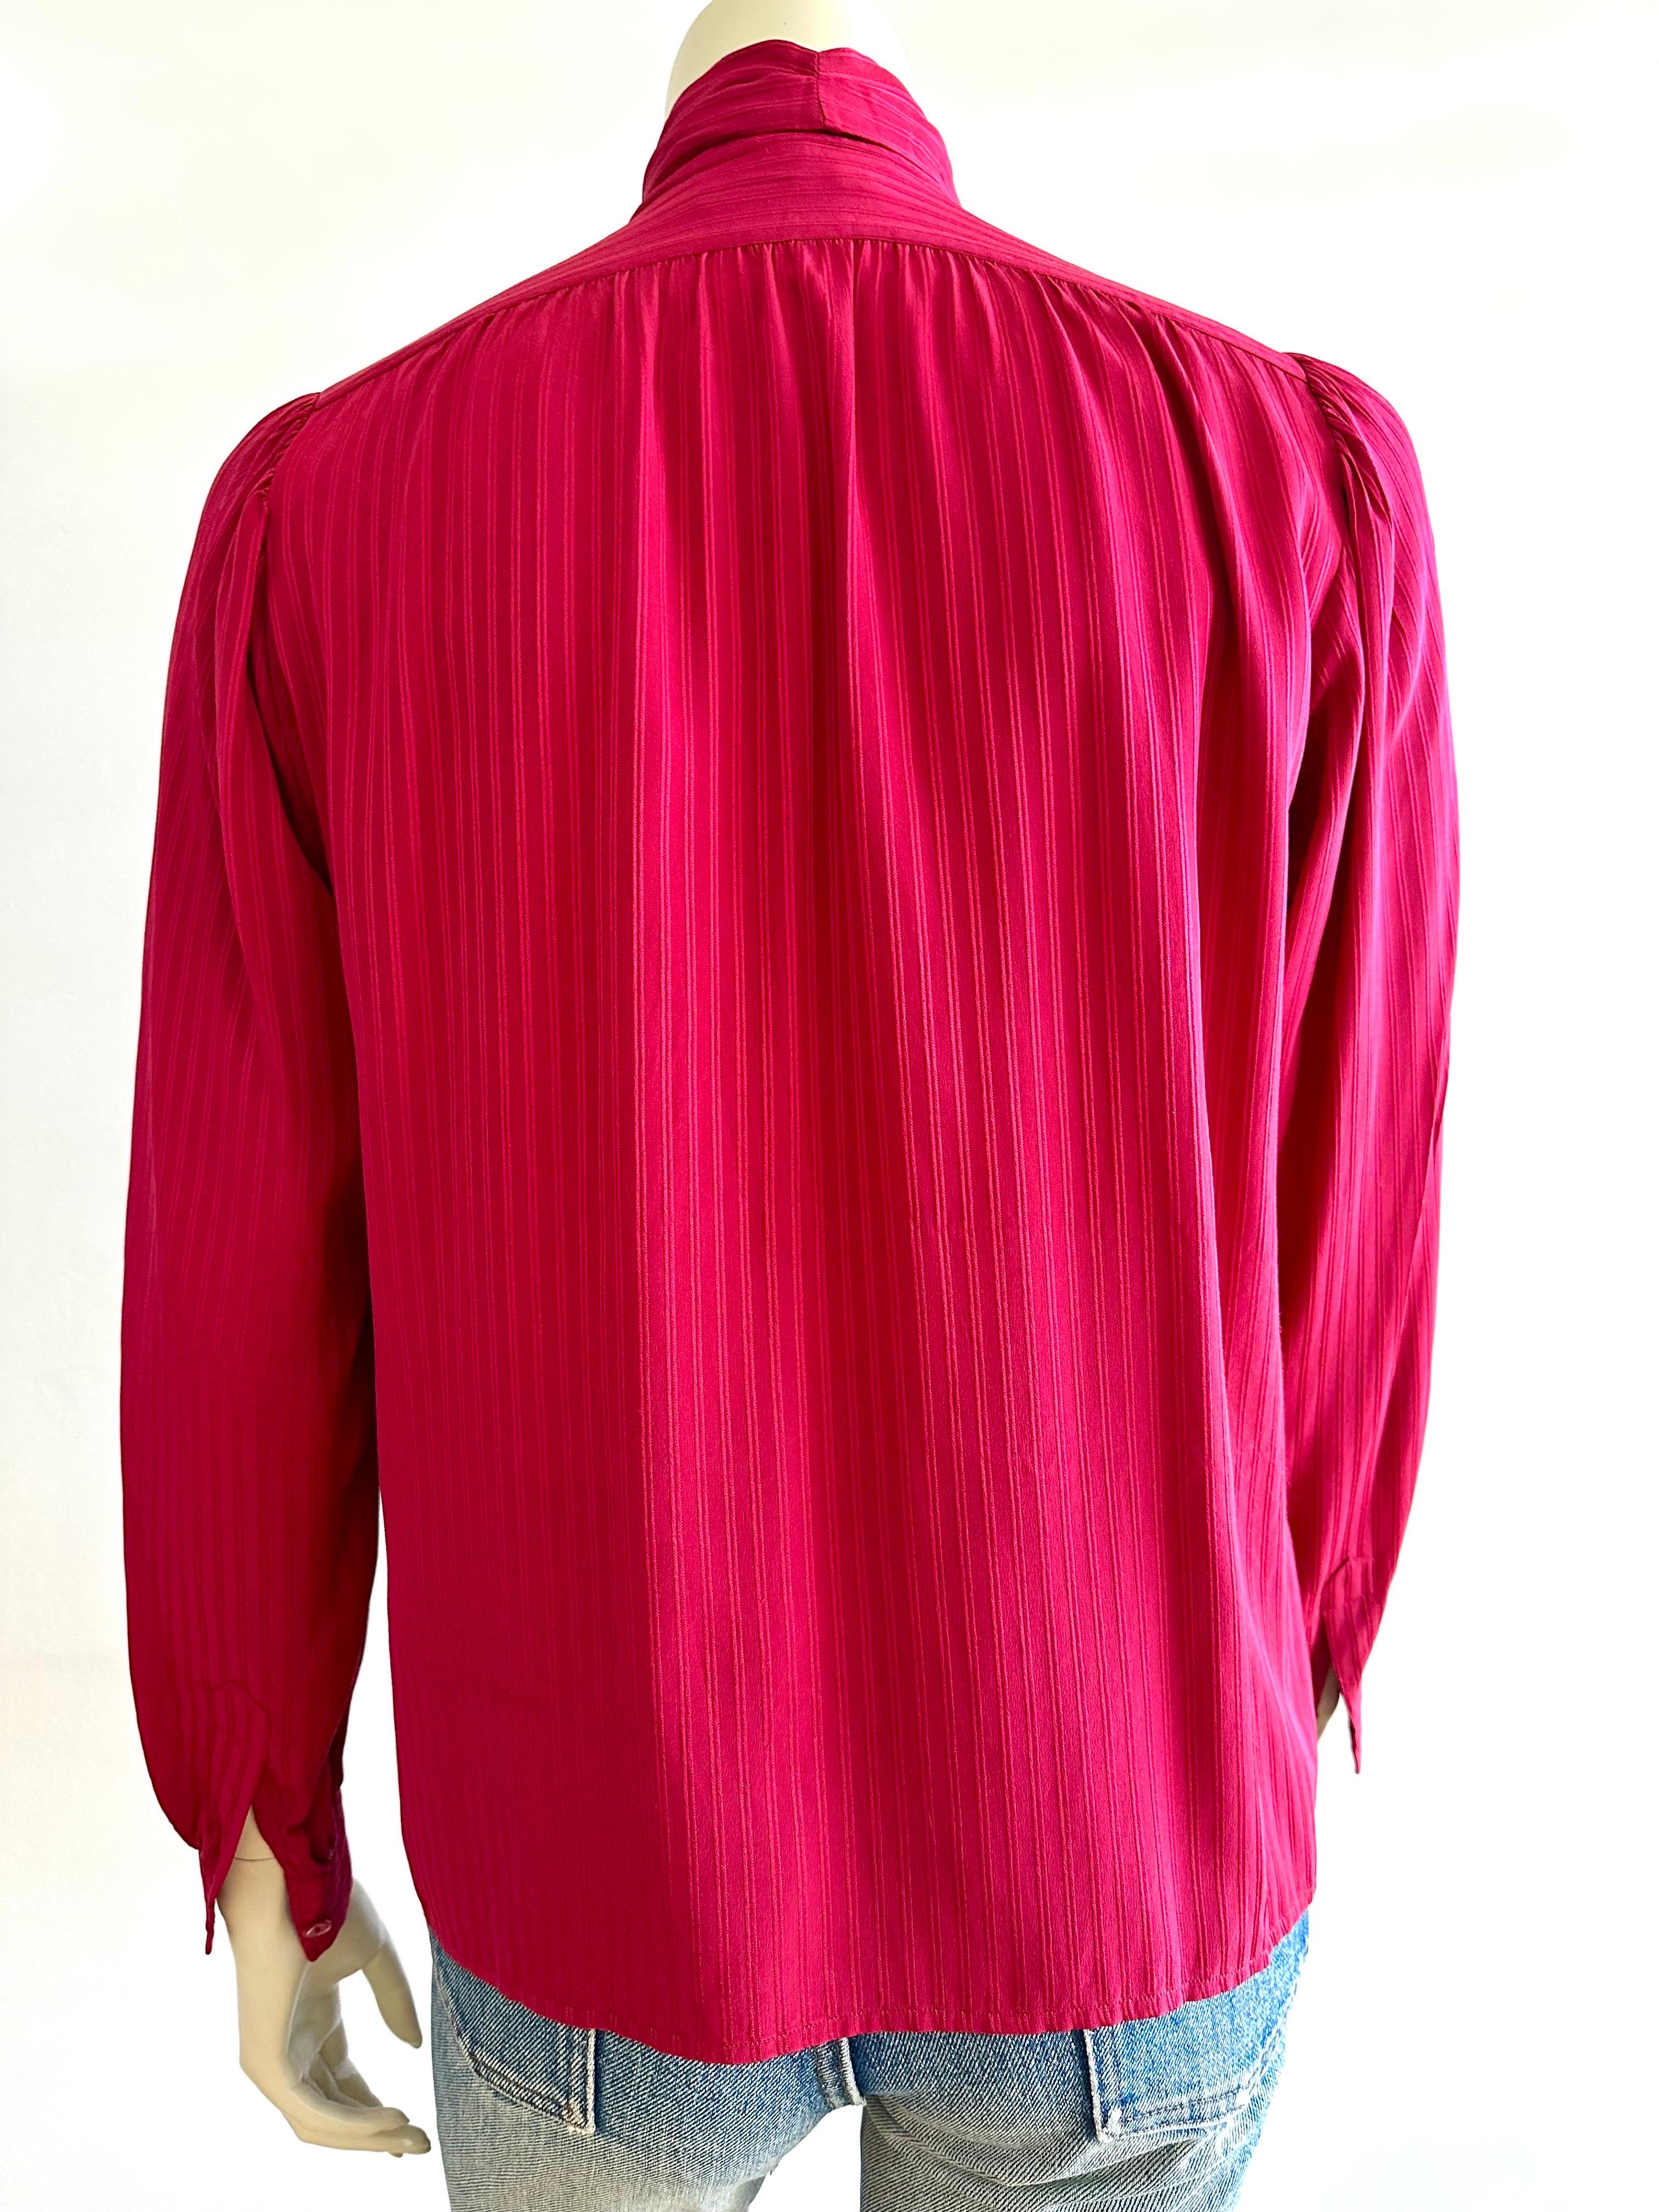 YSL Yves saint Laurent lavalliere blouse in red silk  For Sale 1